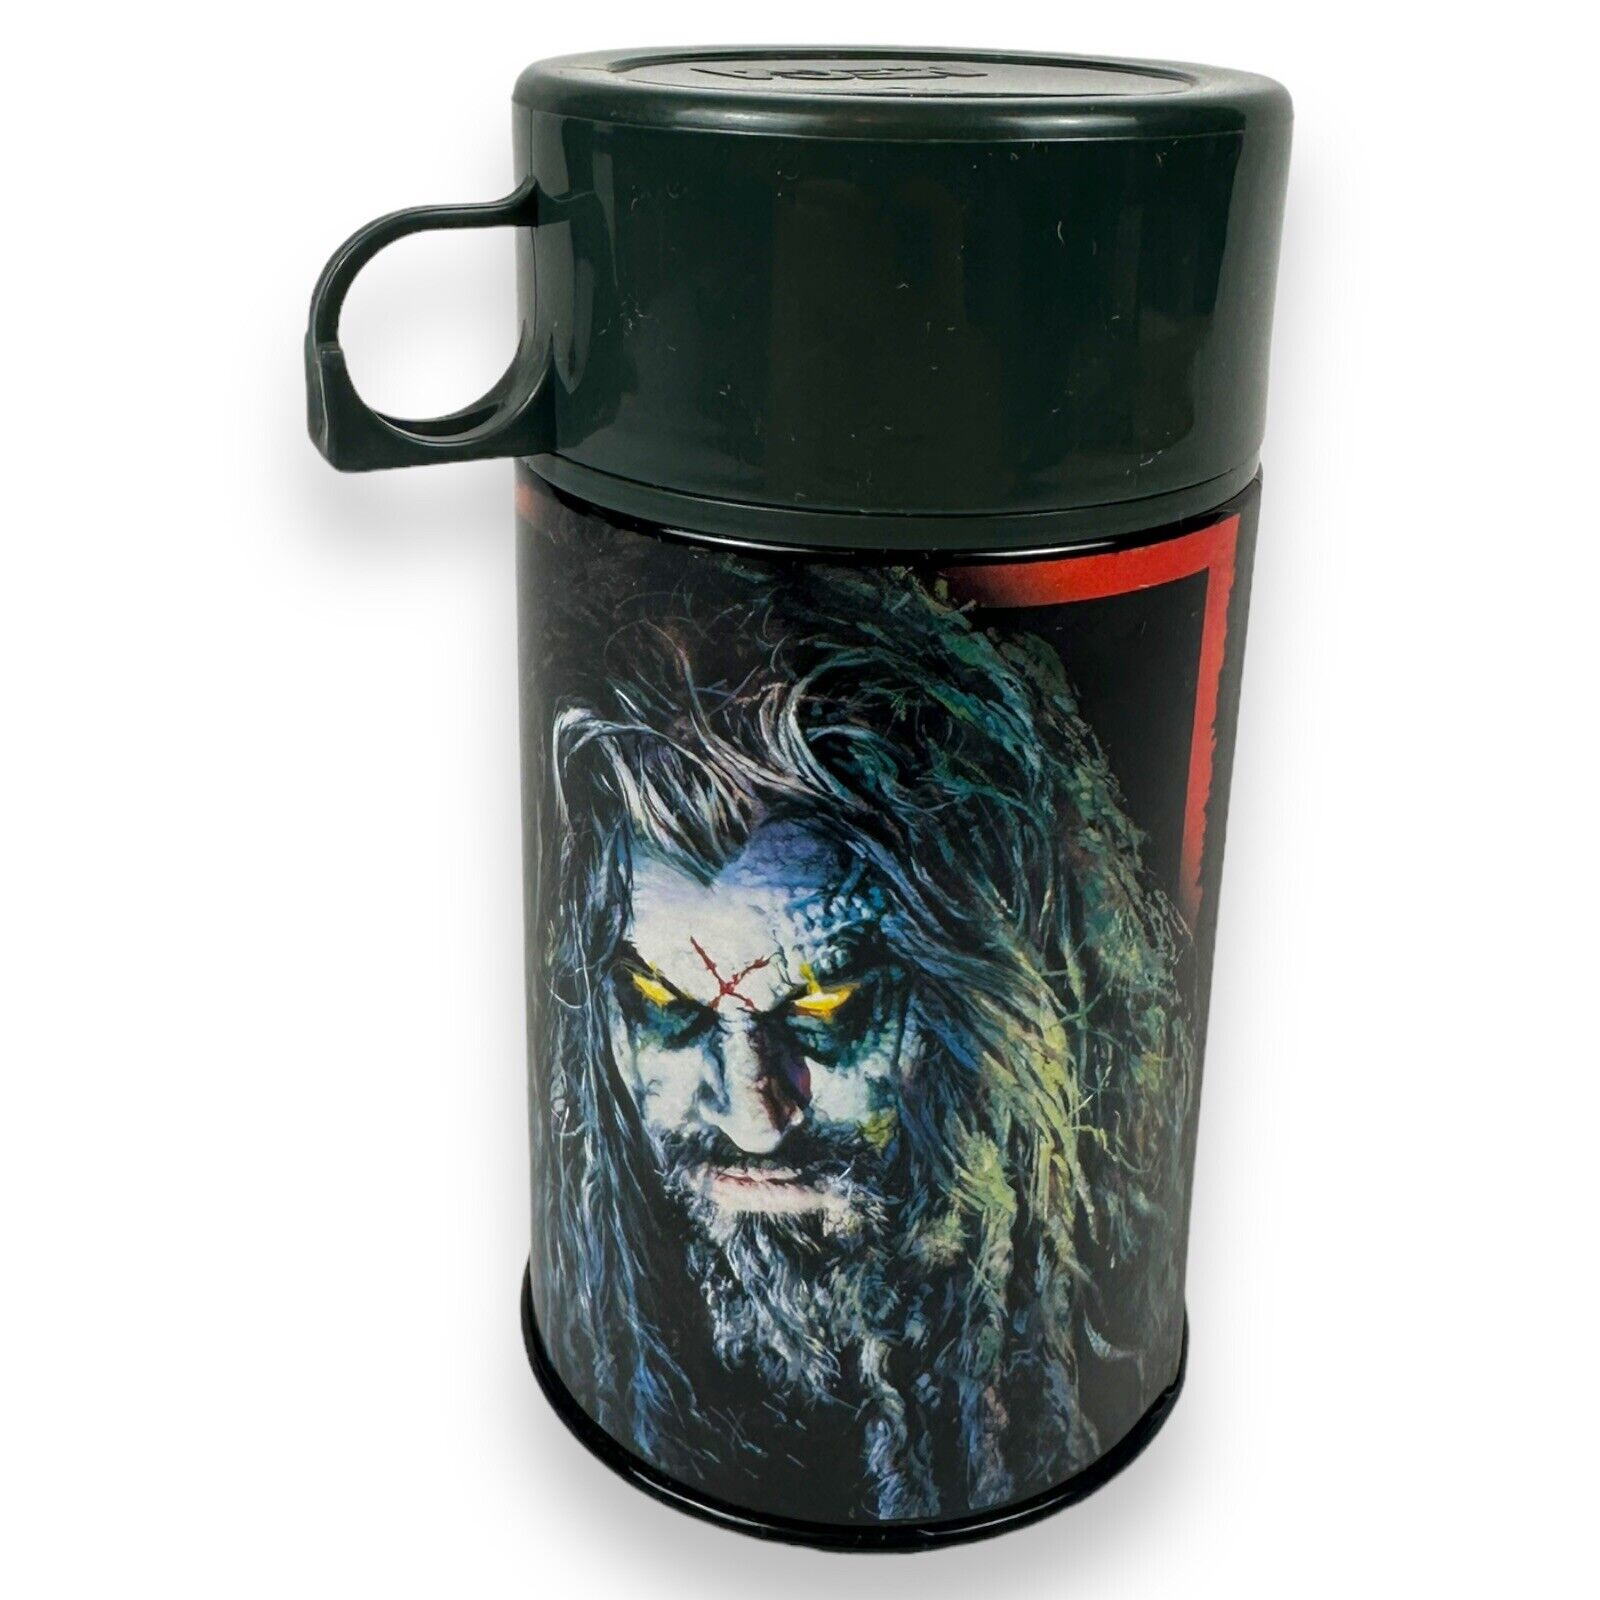 Neca Limited Edition Rob Zombie Hellbilly Deluxe Thermos 2001